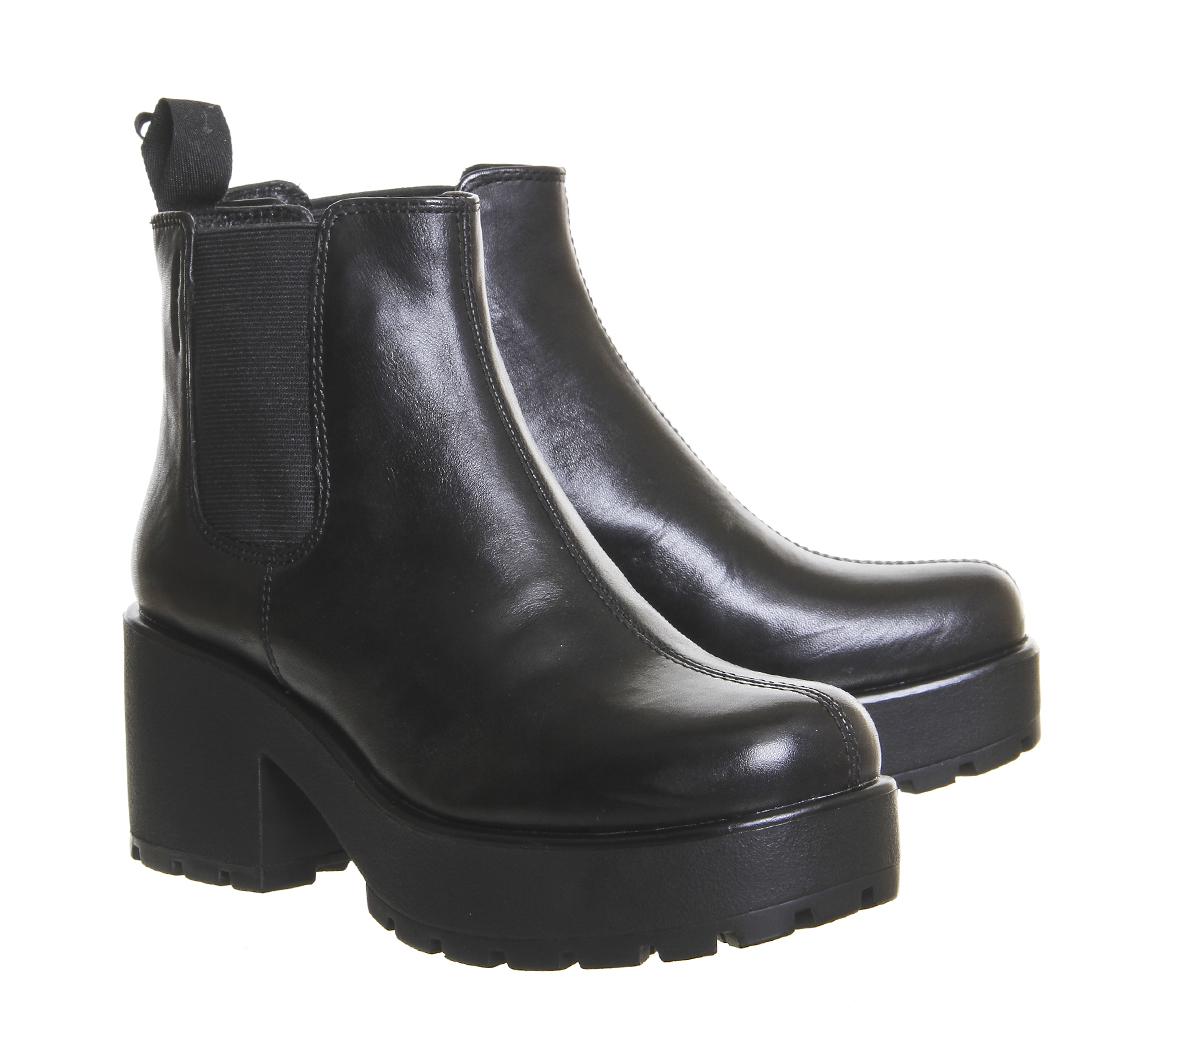 Vagabond Dioon Chunky Leather Chelsea Boots in Black Leather (Black) - Lyst